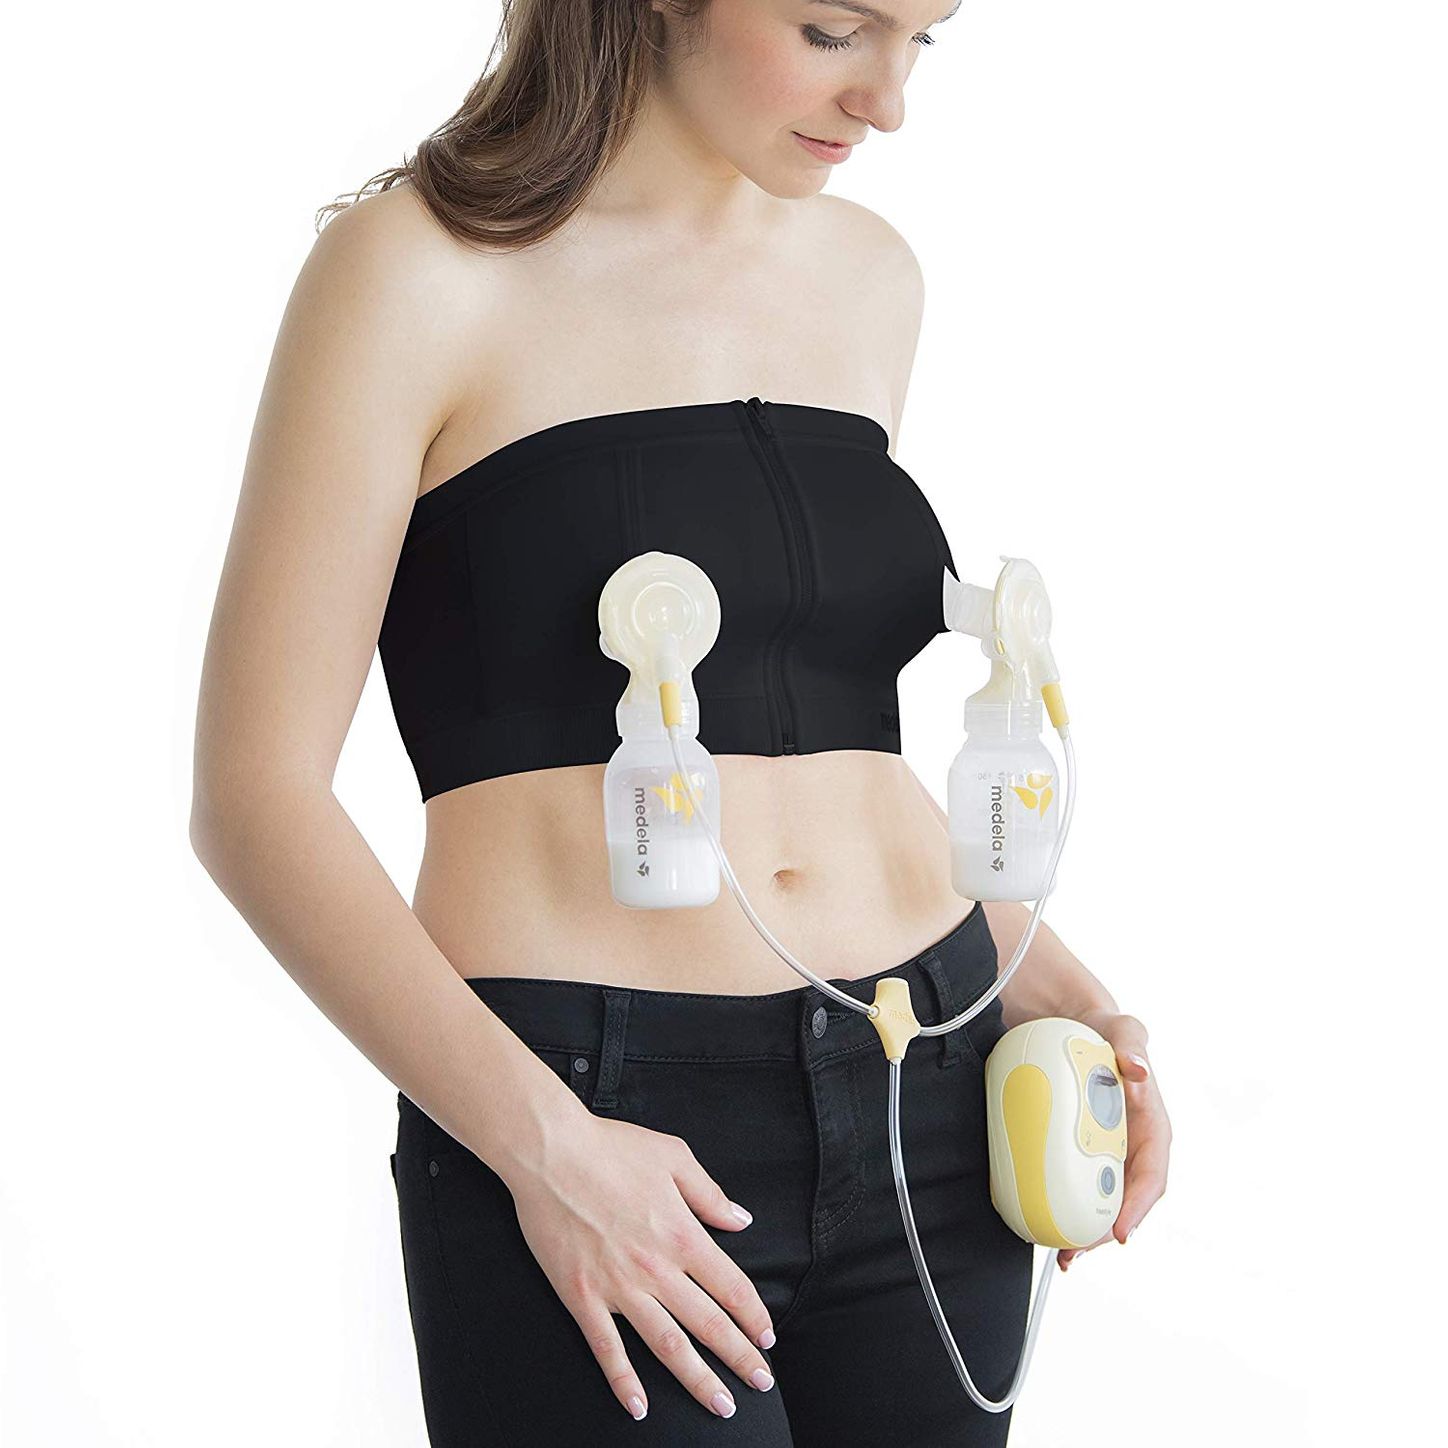 Hands Free Pumping Bras - Kevin & Tara O'Malley Partnership t/a Express The  Best